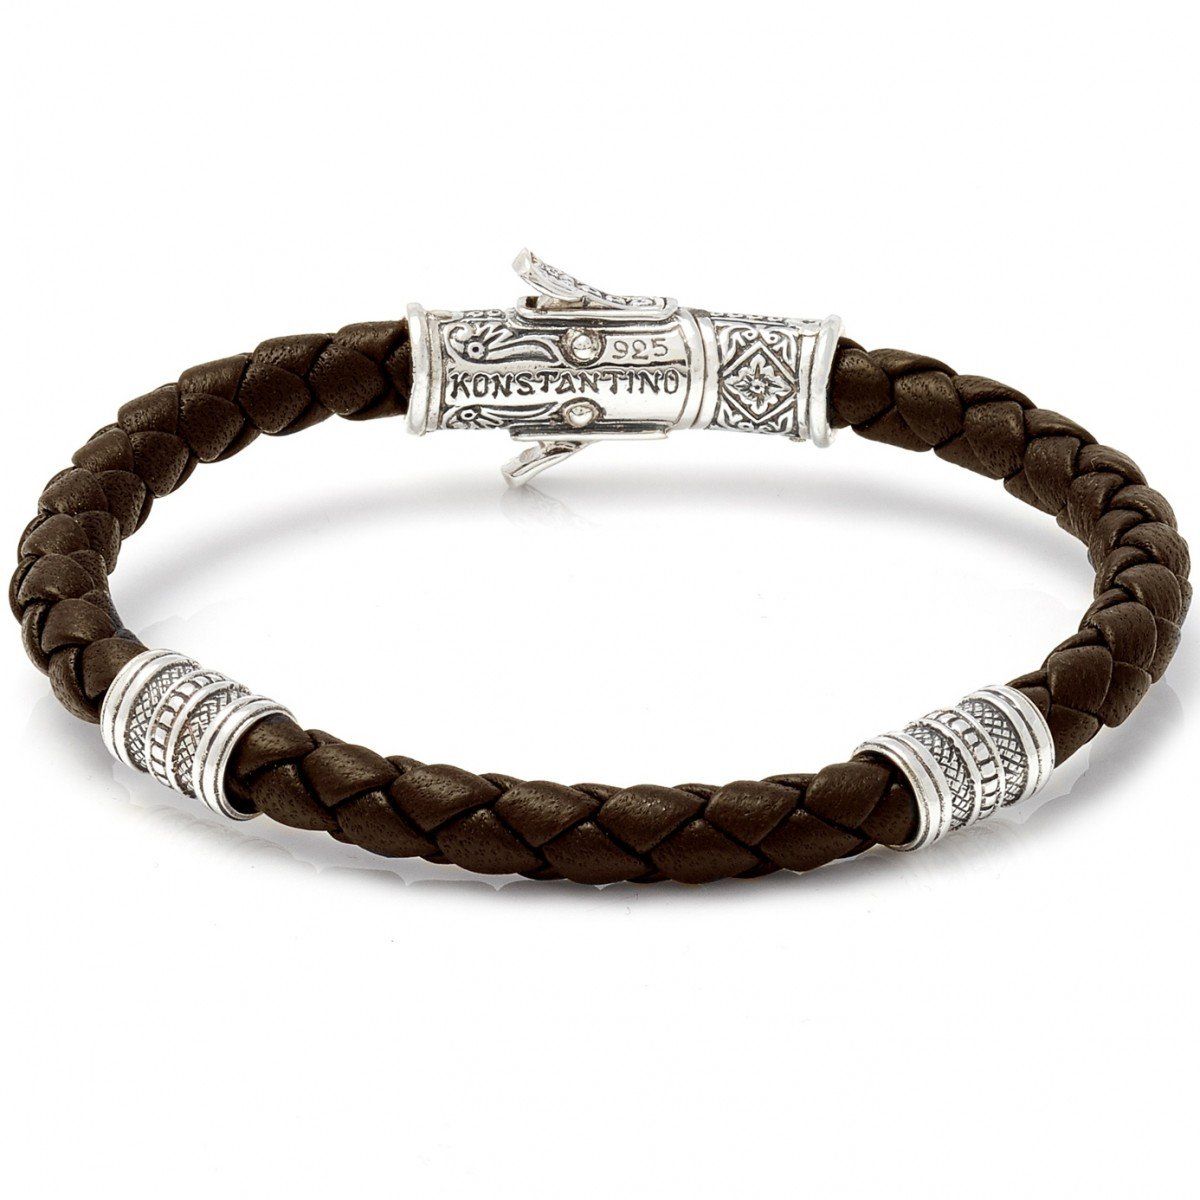 KONSTANTINO STERLING SILVER AND BRAIDED BROWN LEATHER BRACELET